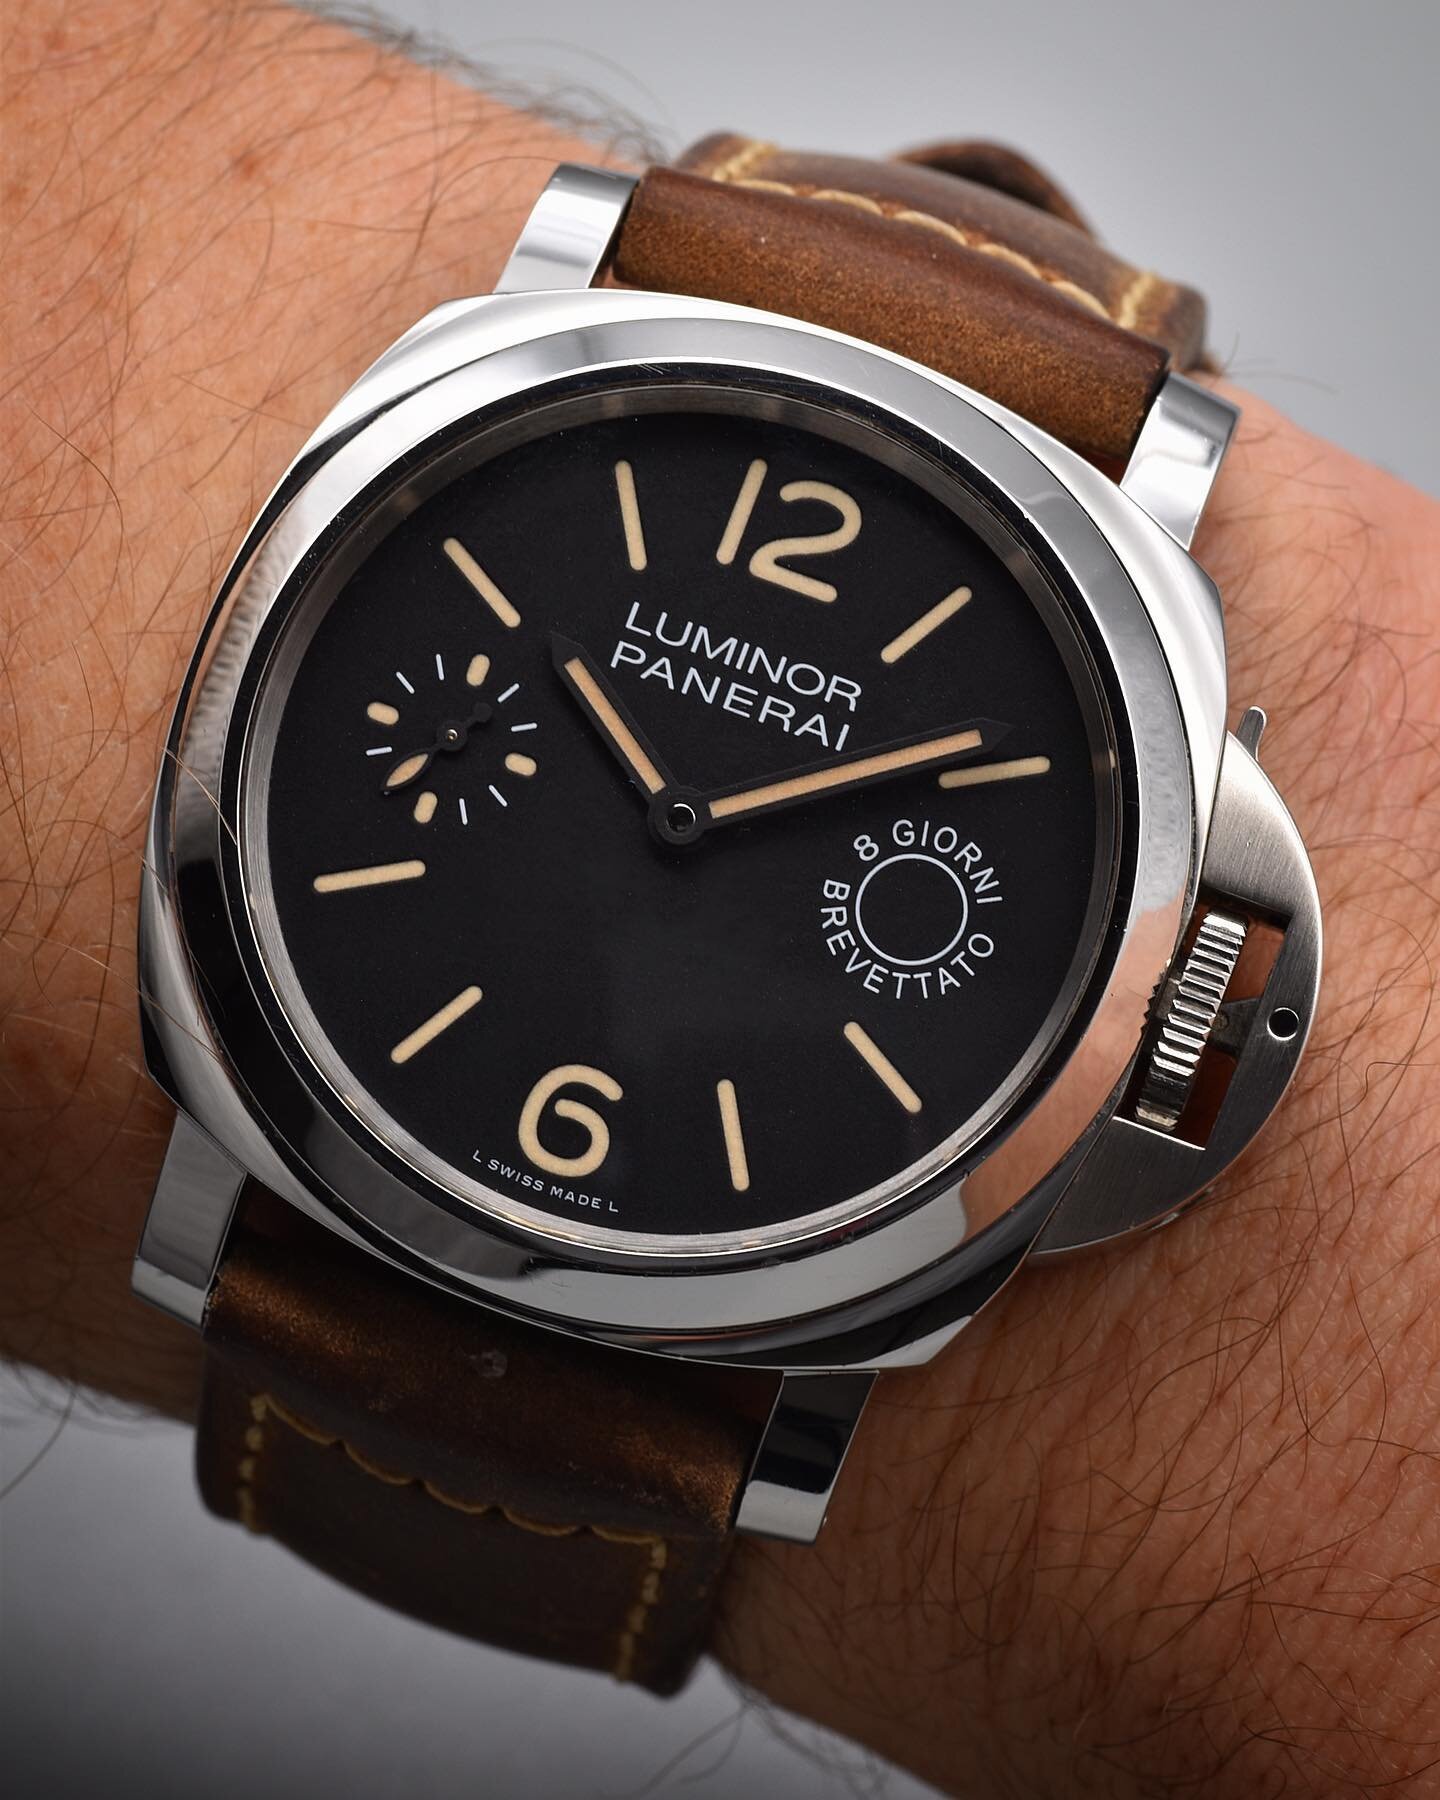 Ending the week with the perfectly balanced Panerai Luminor 8 Giorni PAM590 ✨ 

If you could design a Panerai dial, what would yours look like? Share your ideas! ⬇️

#panerai #pam590 

 #panerailuminor #panerailuminormarina #paneristi #paneristiwho #